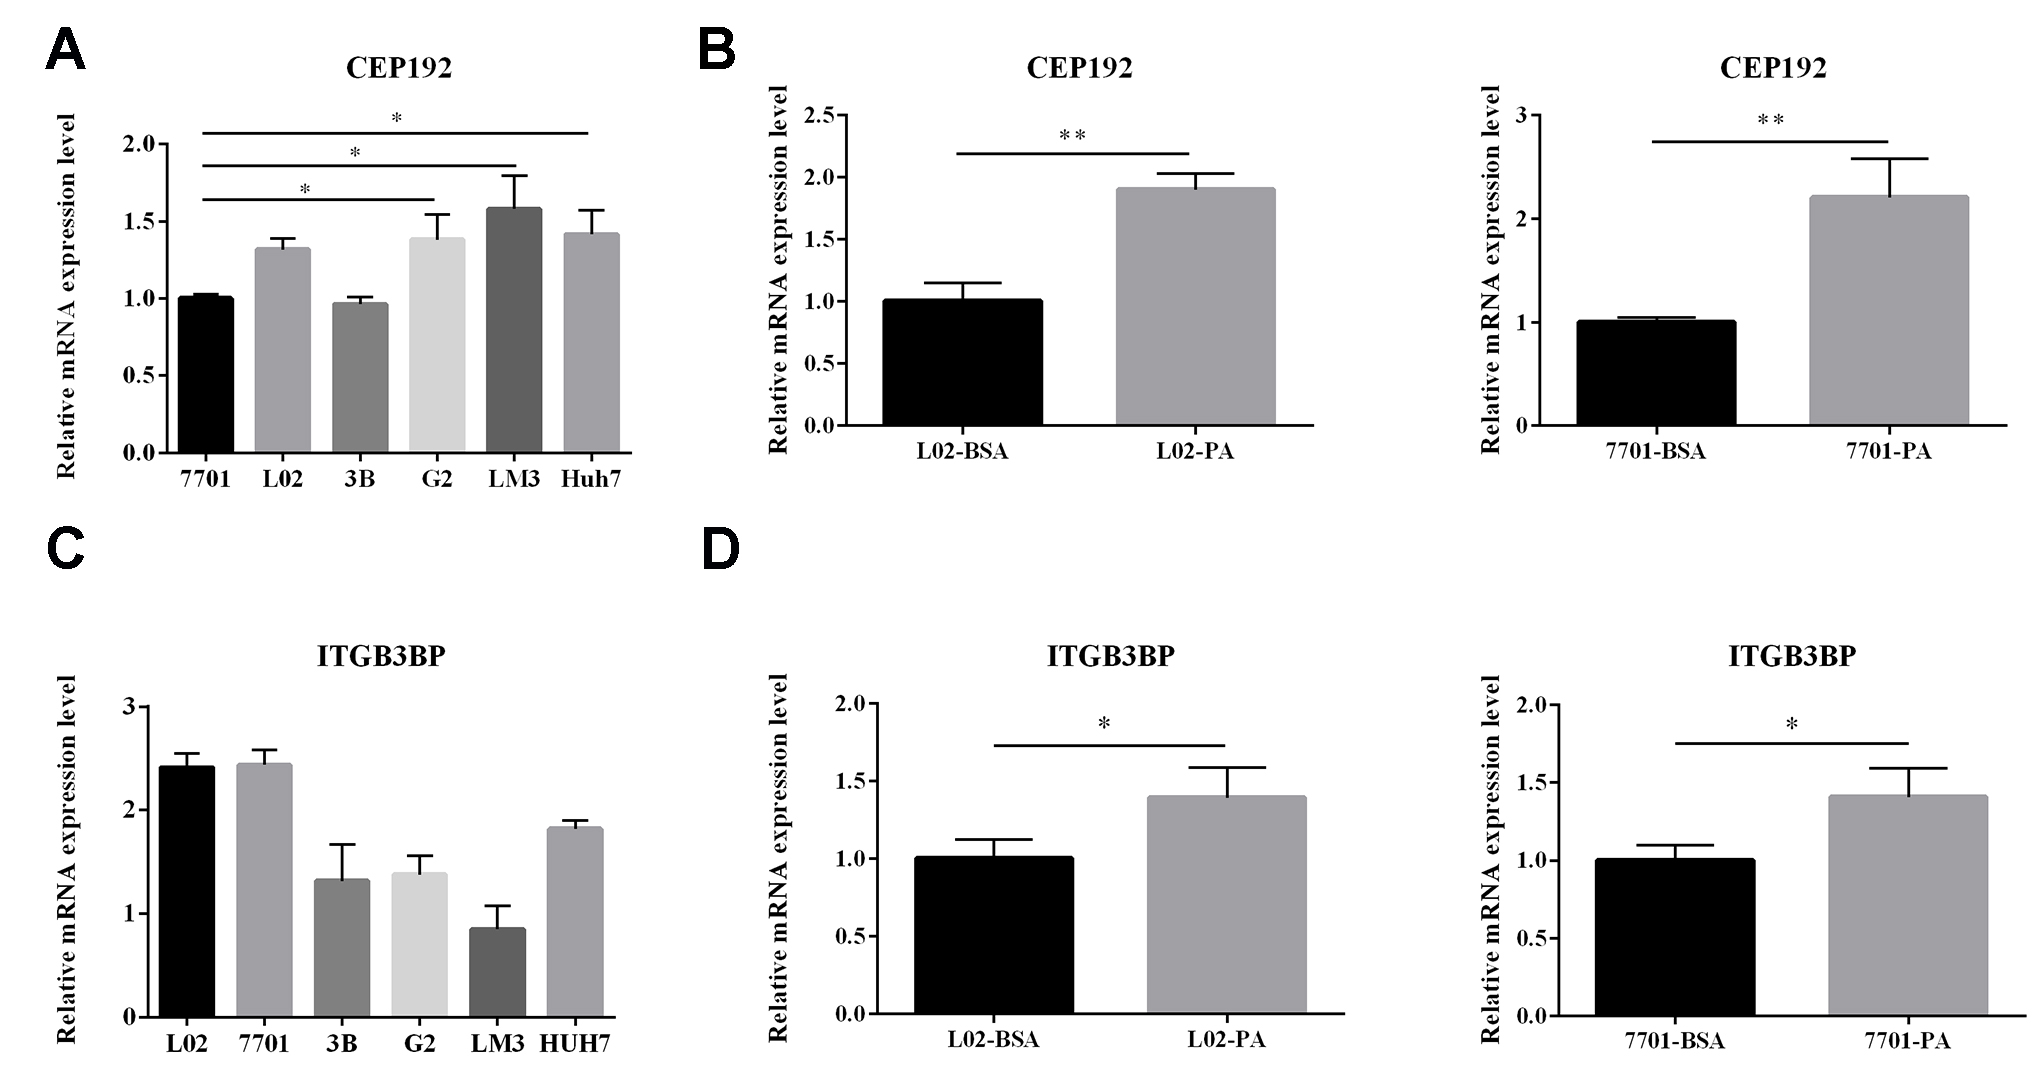 Gene expression status of CEP192 and ITGB3BP were validated by qRT-PCR. (A, C) The expression of CEP192 and ITGB3BP in 4 human HCC cells (HepG2, Hep3B, Huh7 and LM3) and 2 normal human hepatic cells (QSG-7701 and L-02); (B, D) The expression of CEP192 and ITGB3BP in PA-treated cells (QSG-7701 and L-02) and normal controls. The results are expressed as the mean ± SD. p*< 0.05, p**< 0.01.